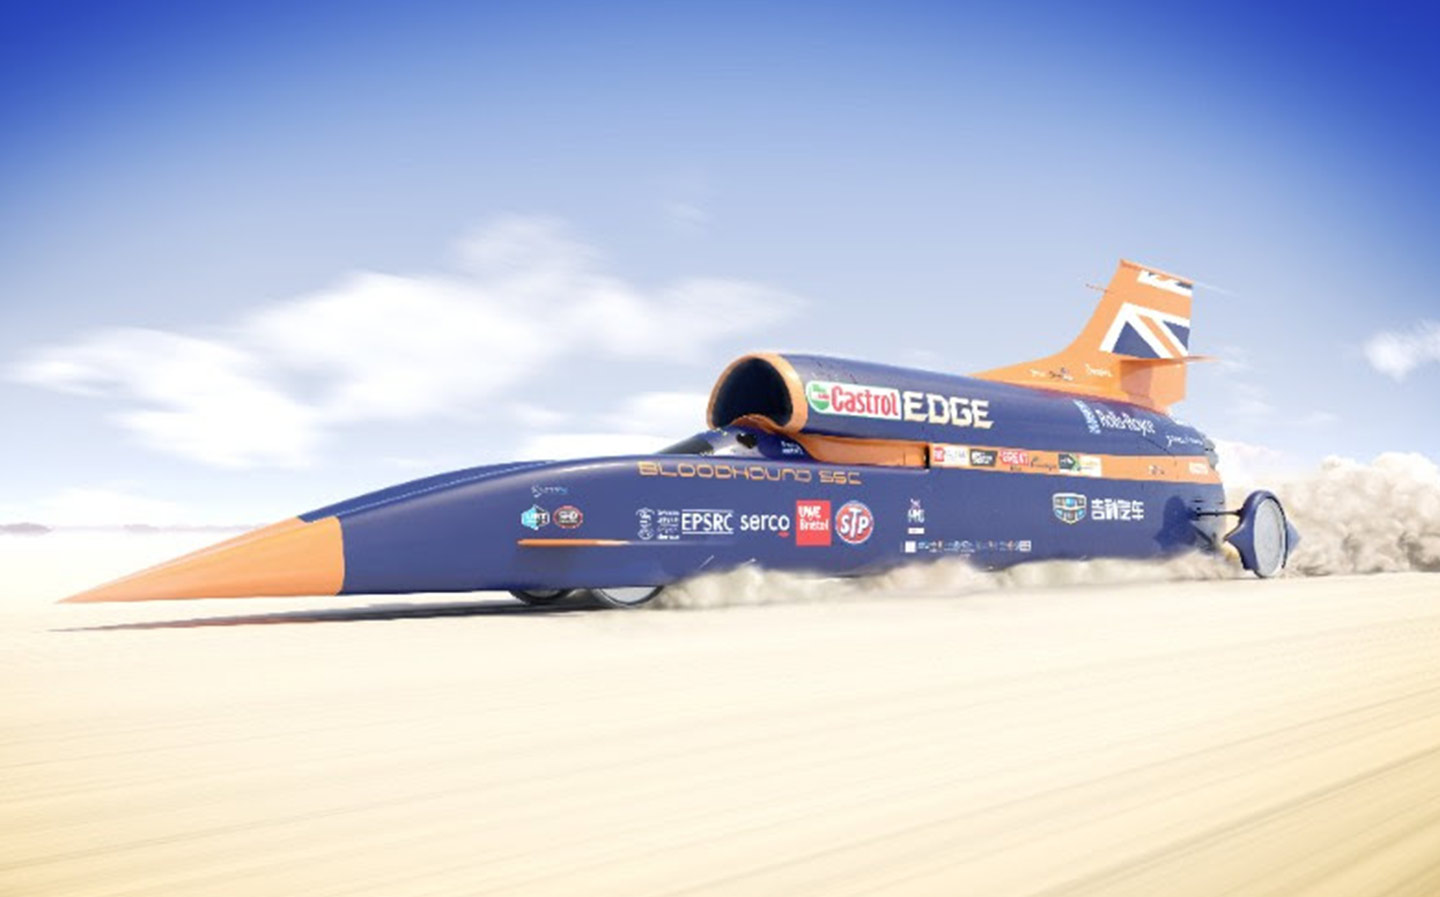 Bloudhound SSC car will make its 1,000mph land speed record attempt in autumn 2019